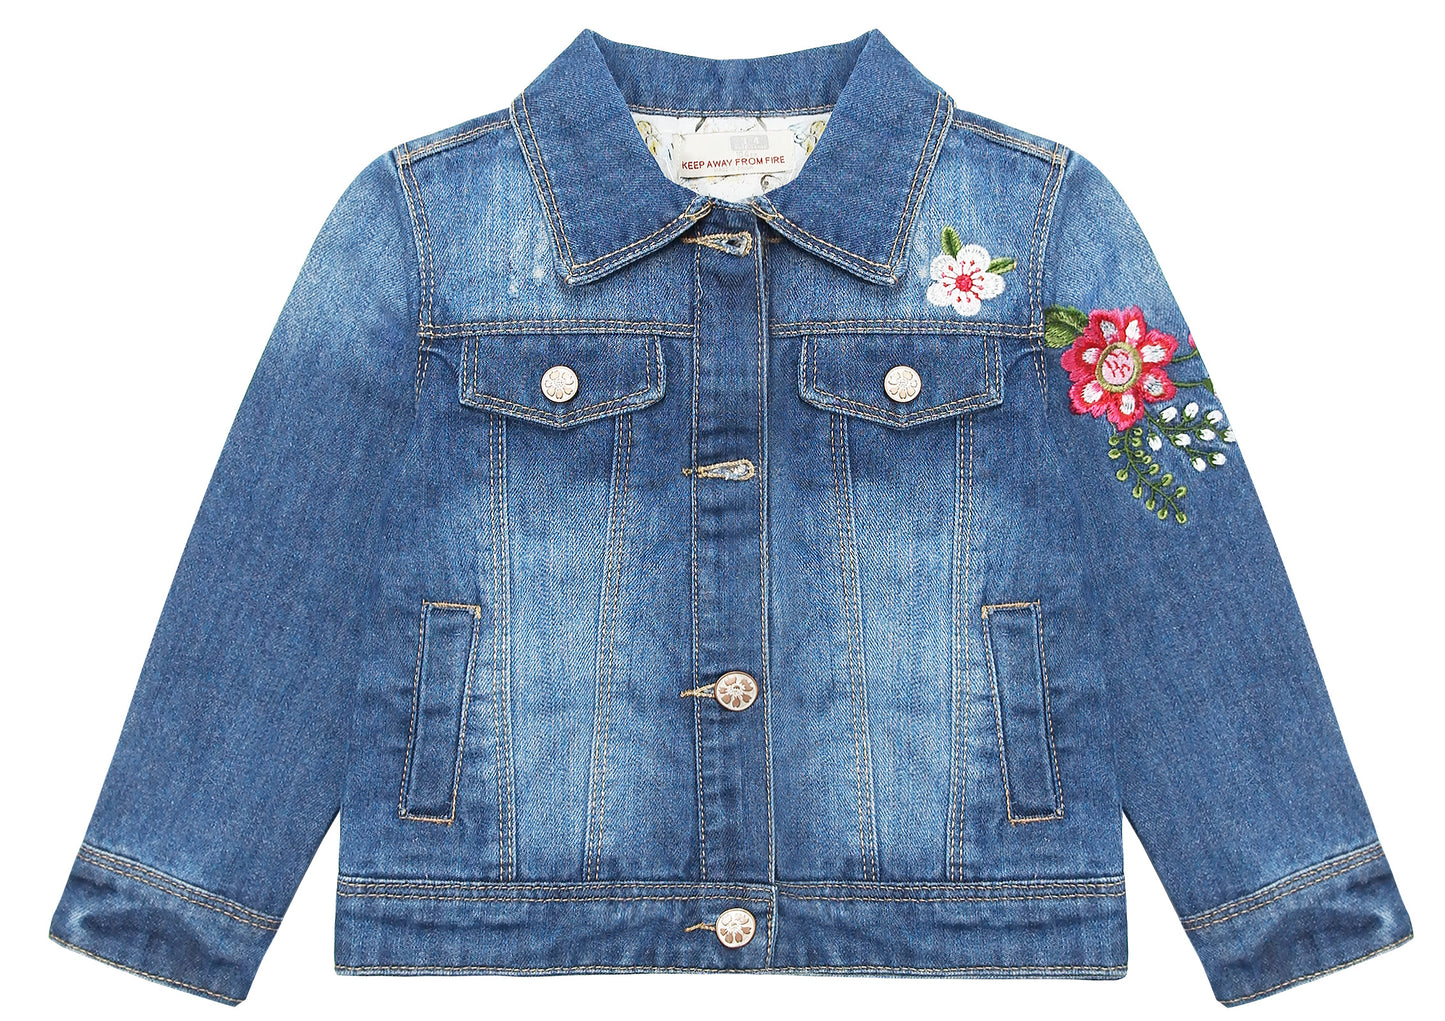 Girls Flower Embroidered Denim Jacket Outfits